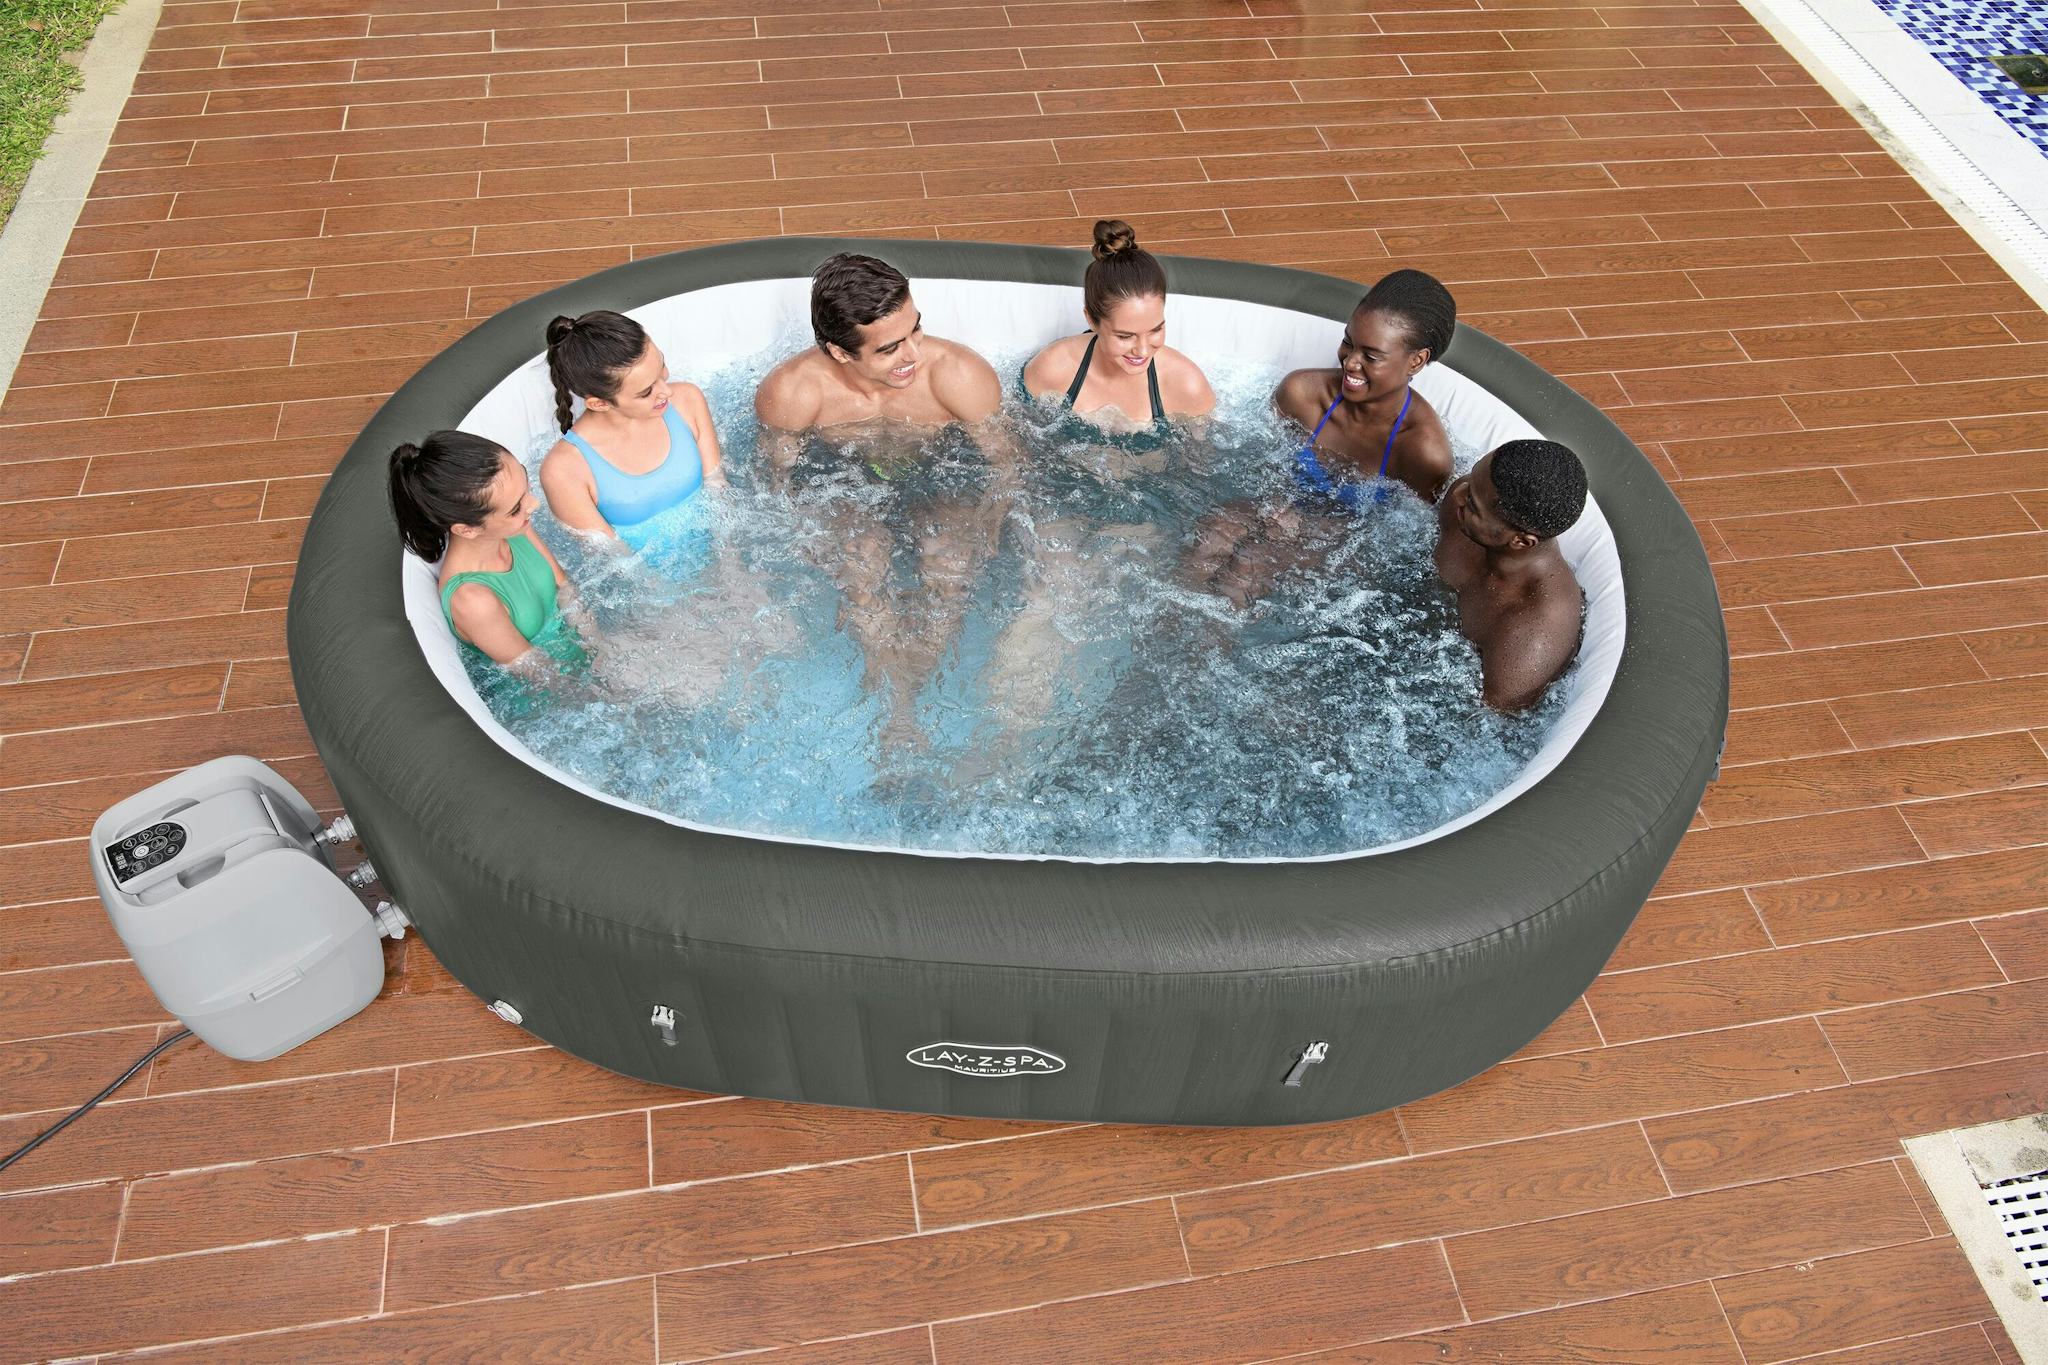 Spas Gonflables Spa gonflable ovale Lay-Z-Spa Mauritius Airjet™ 5 - 7 personnes Bestway 10